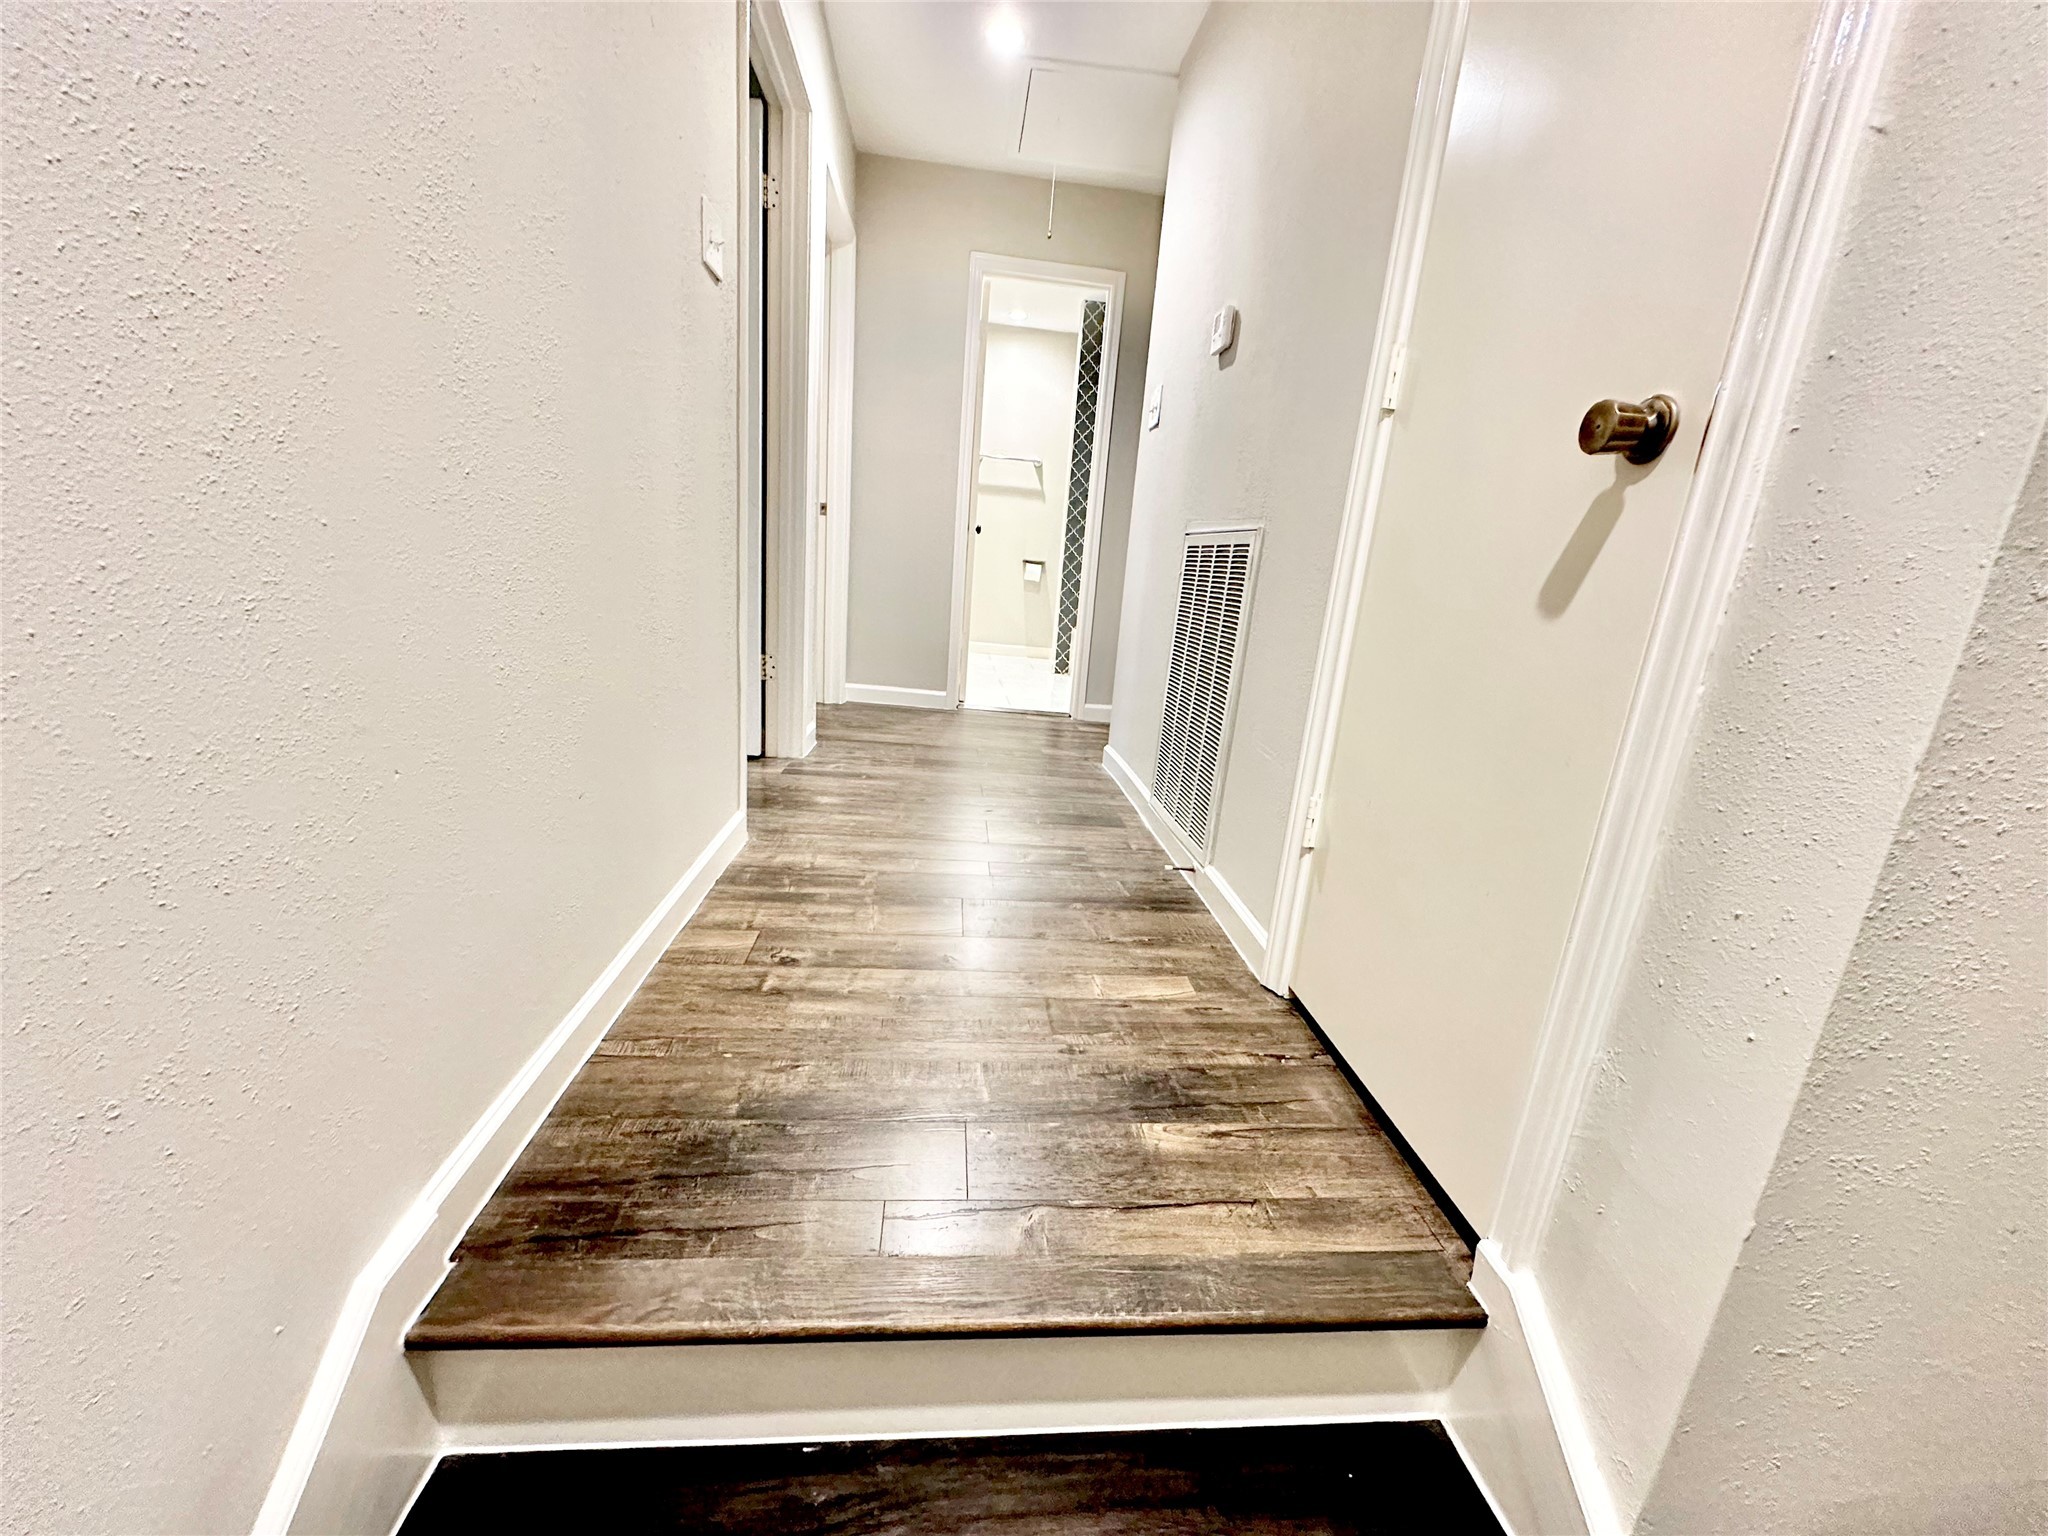 The landing to second floor also has laminate flooring. Two secondary bedrooms are located on the left and straight ahead is the hall bathroom.